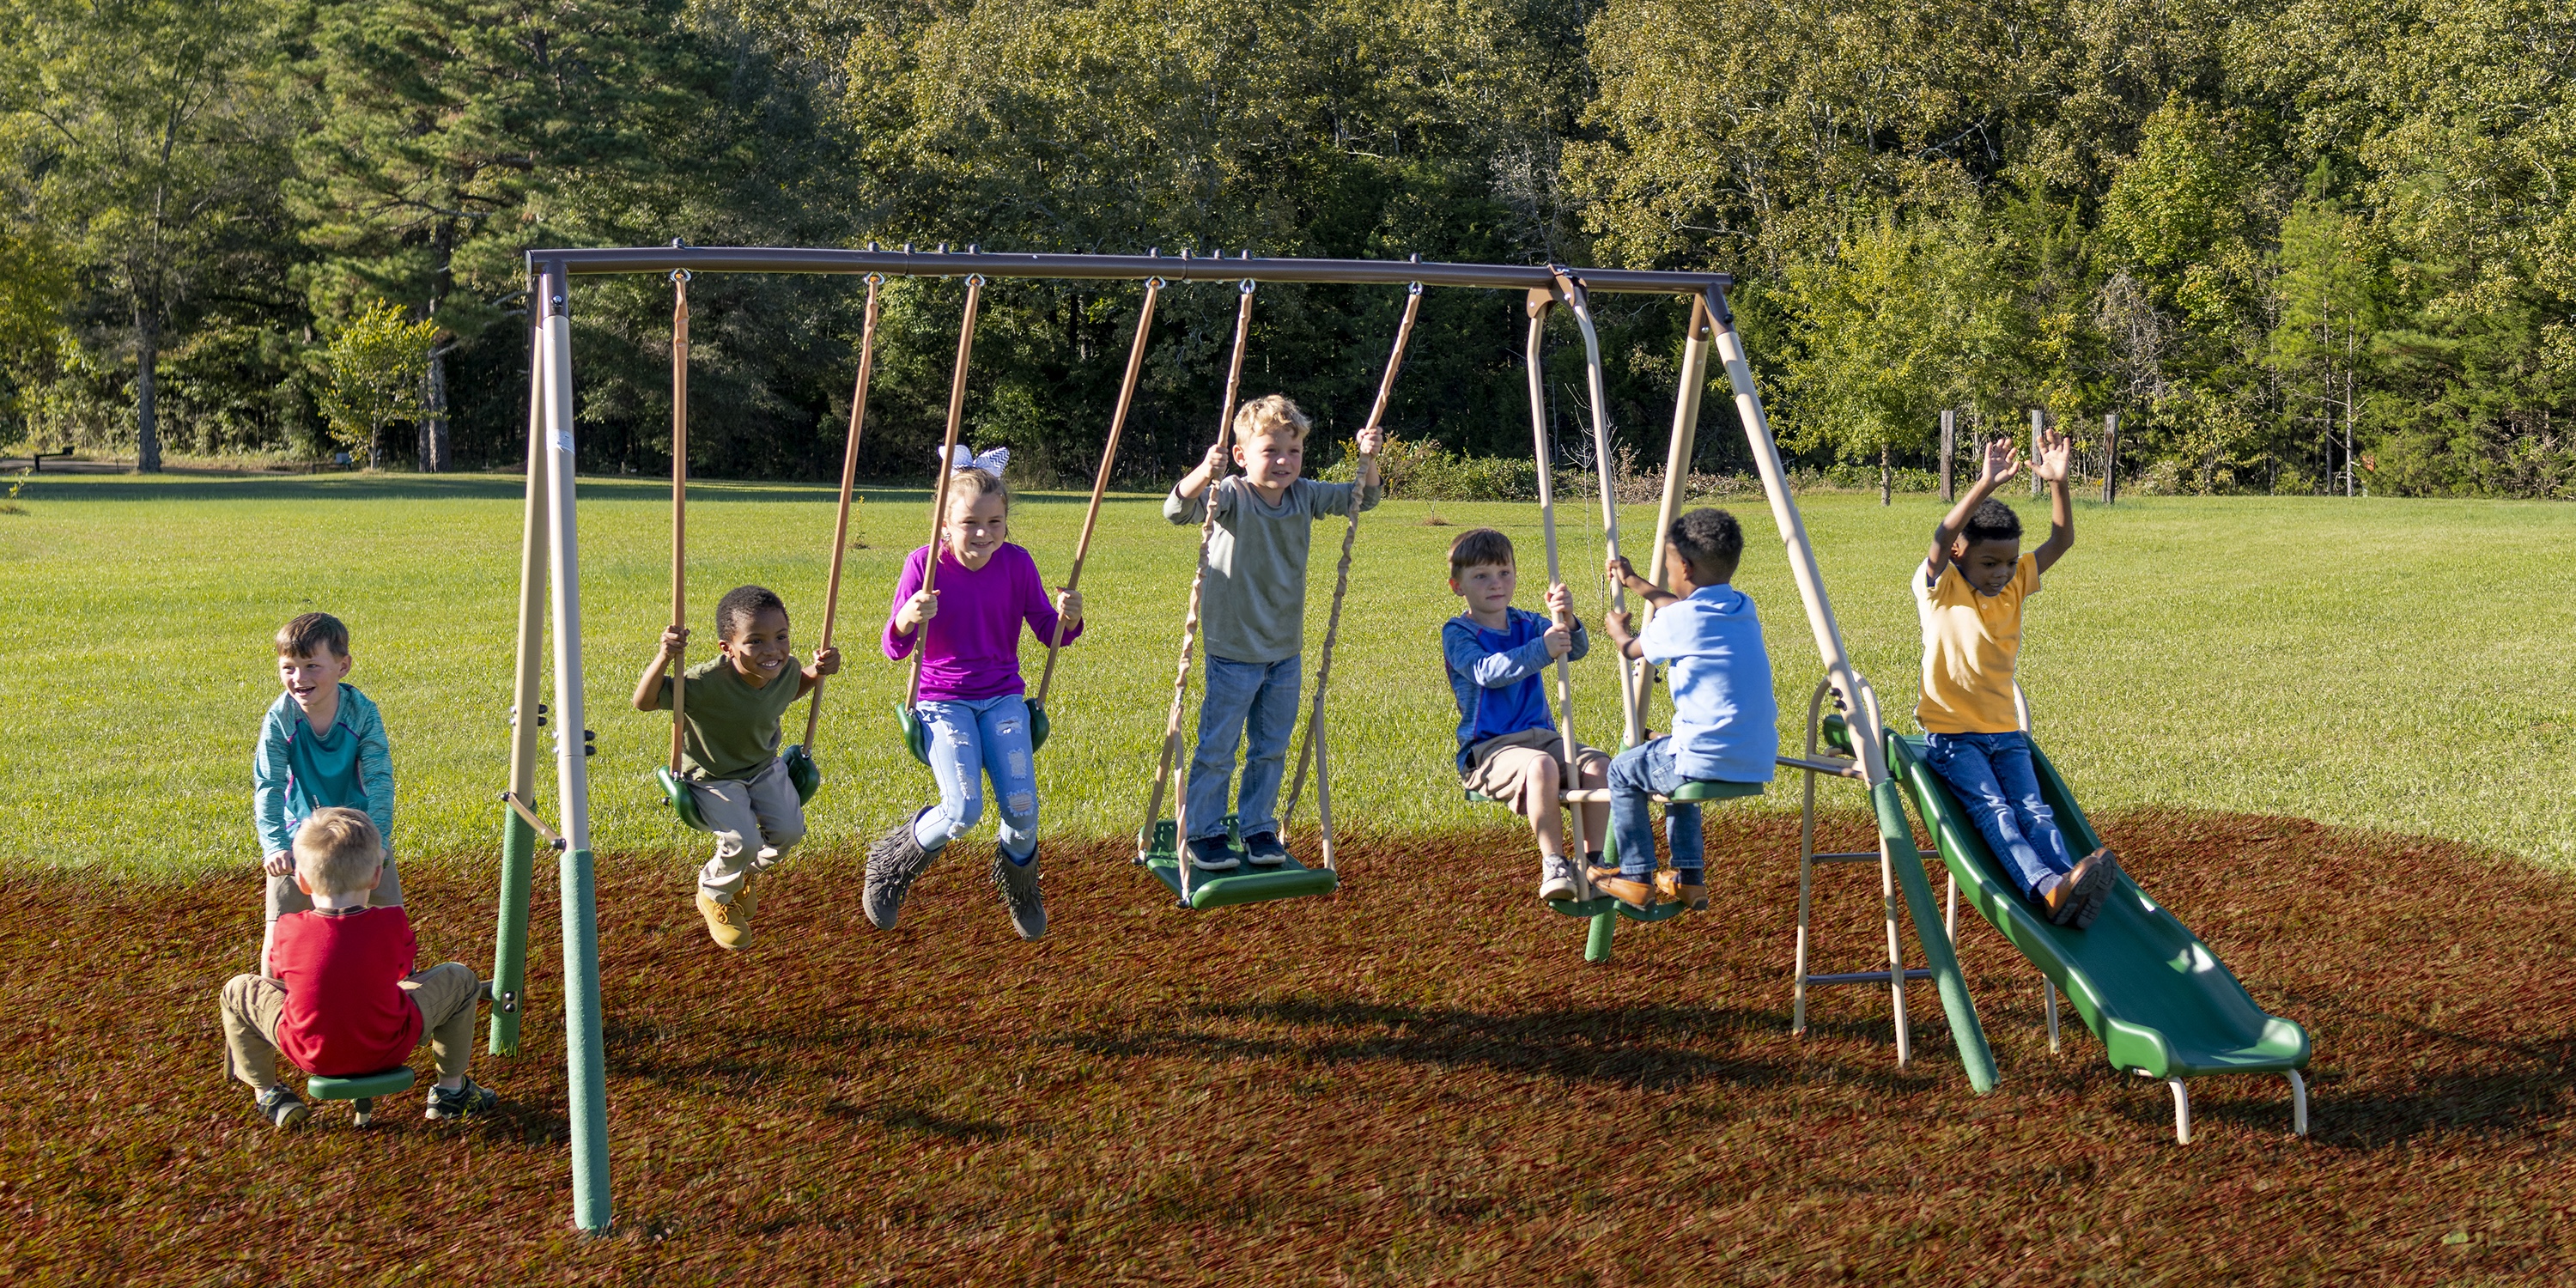 Crestview Swing Set by XDP Recreation with 2 Swing Seats, Stand R Swing, Wave Slide, Fun Glider, & See Saw - image 5 of 7